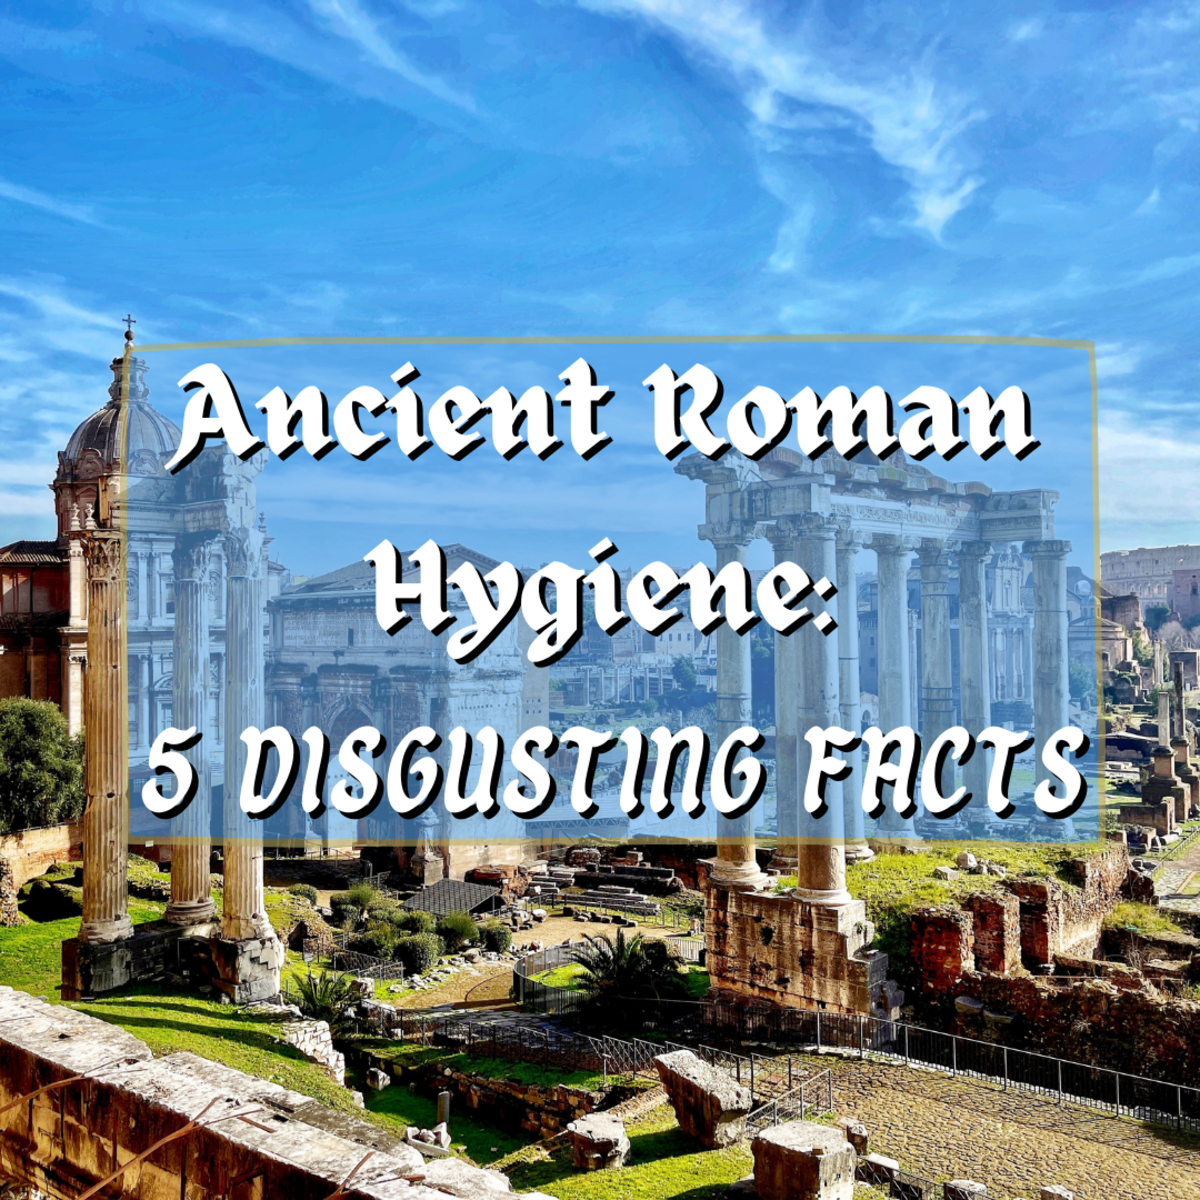 5 Disgusting Habits That Were Perfectly Normal in Ancient Rome